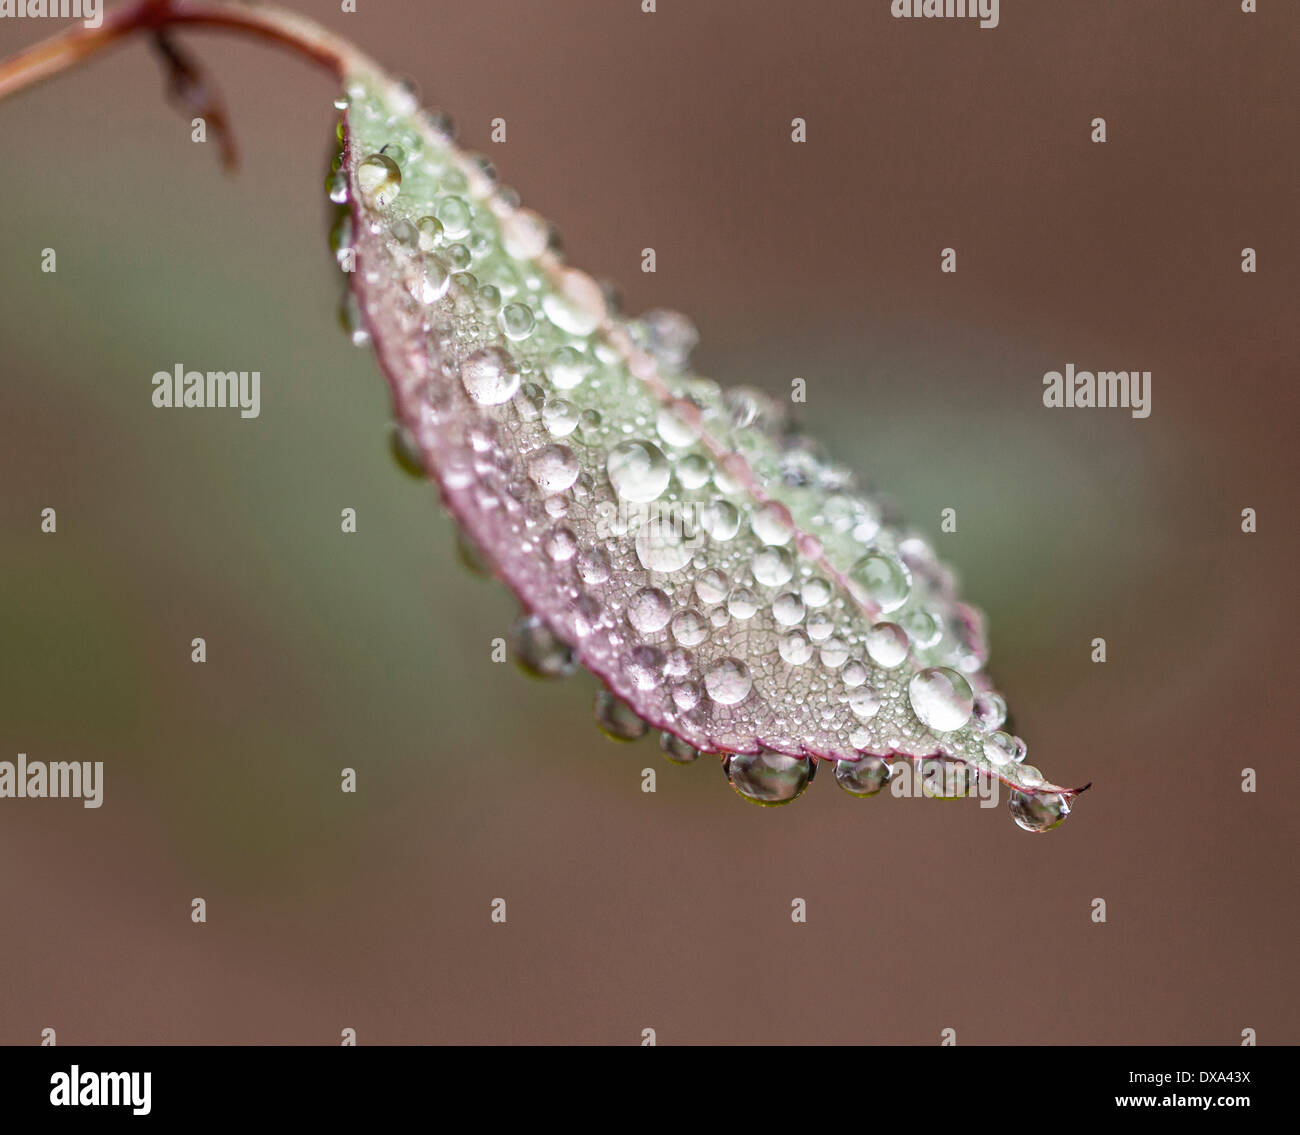 Water drops on leaf in an Autumn background Stock Photo